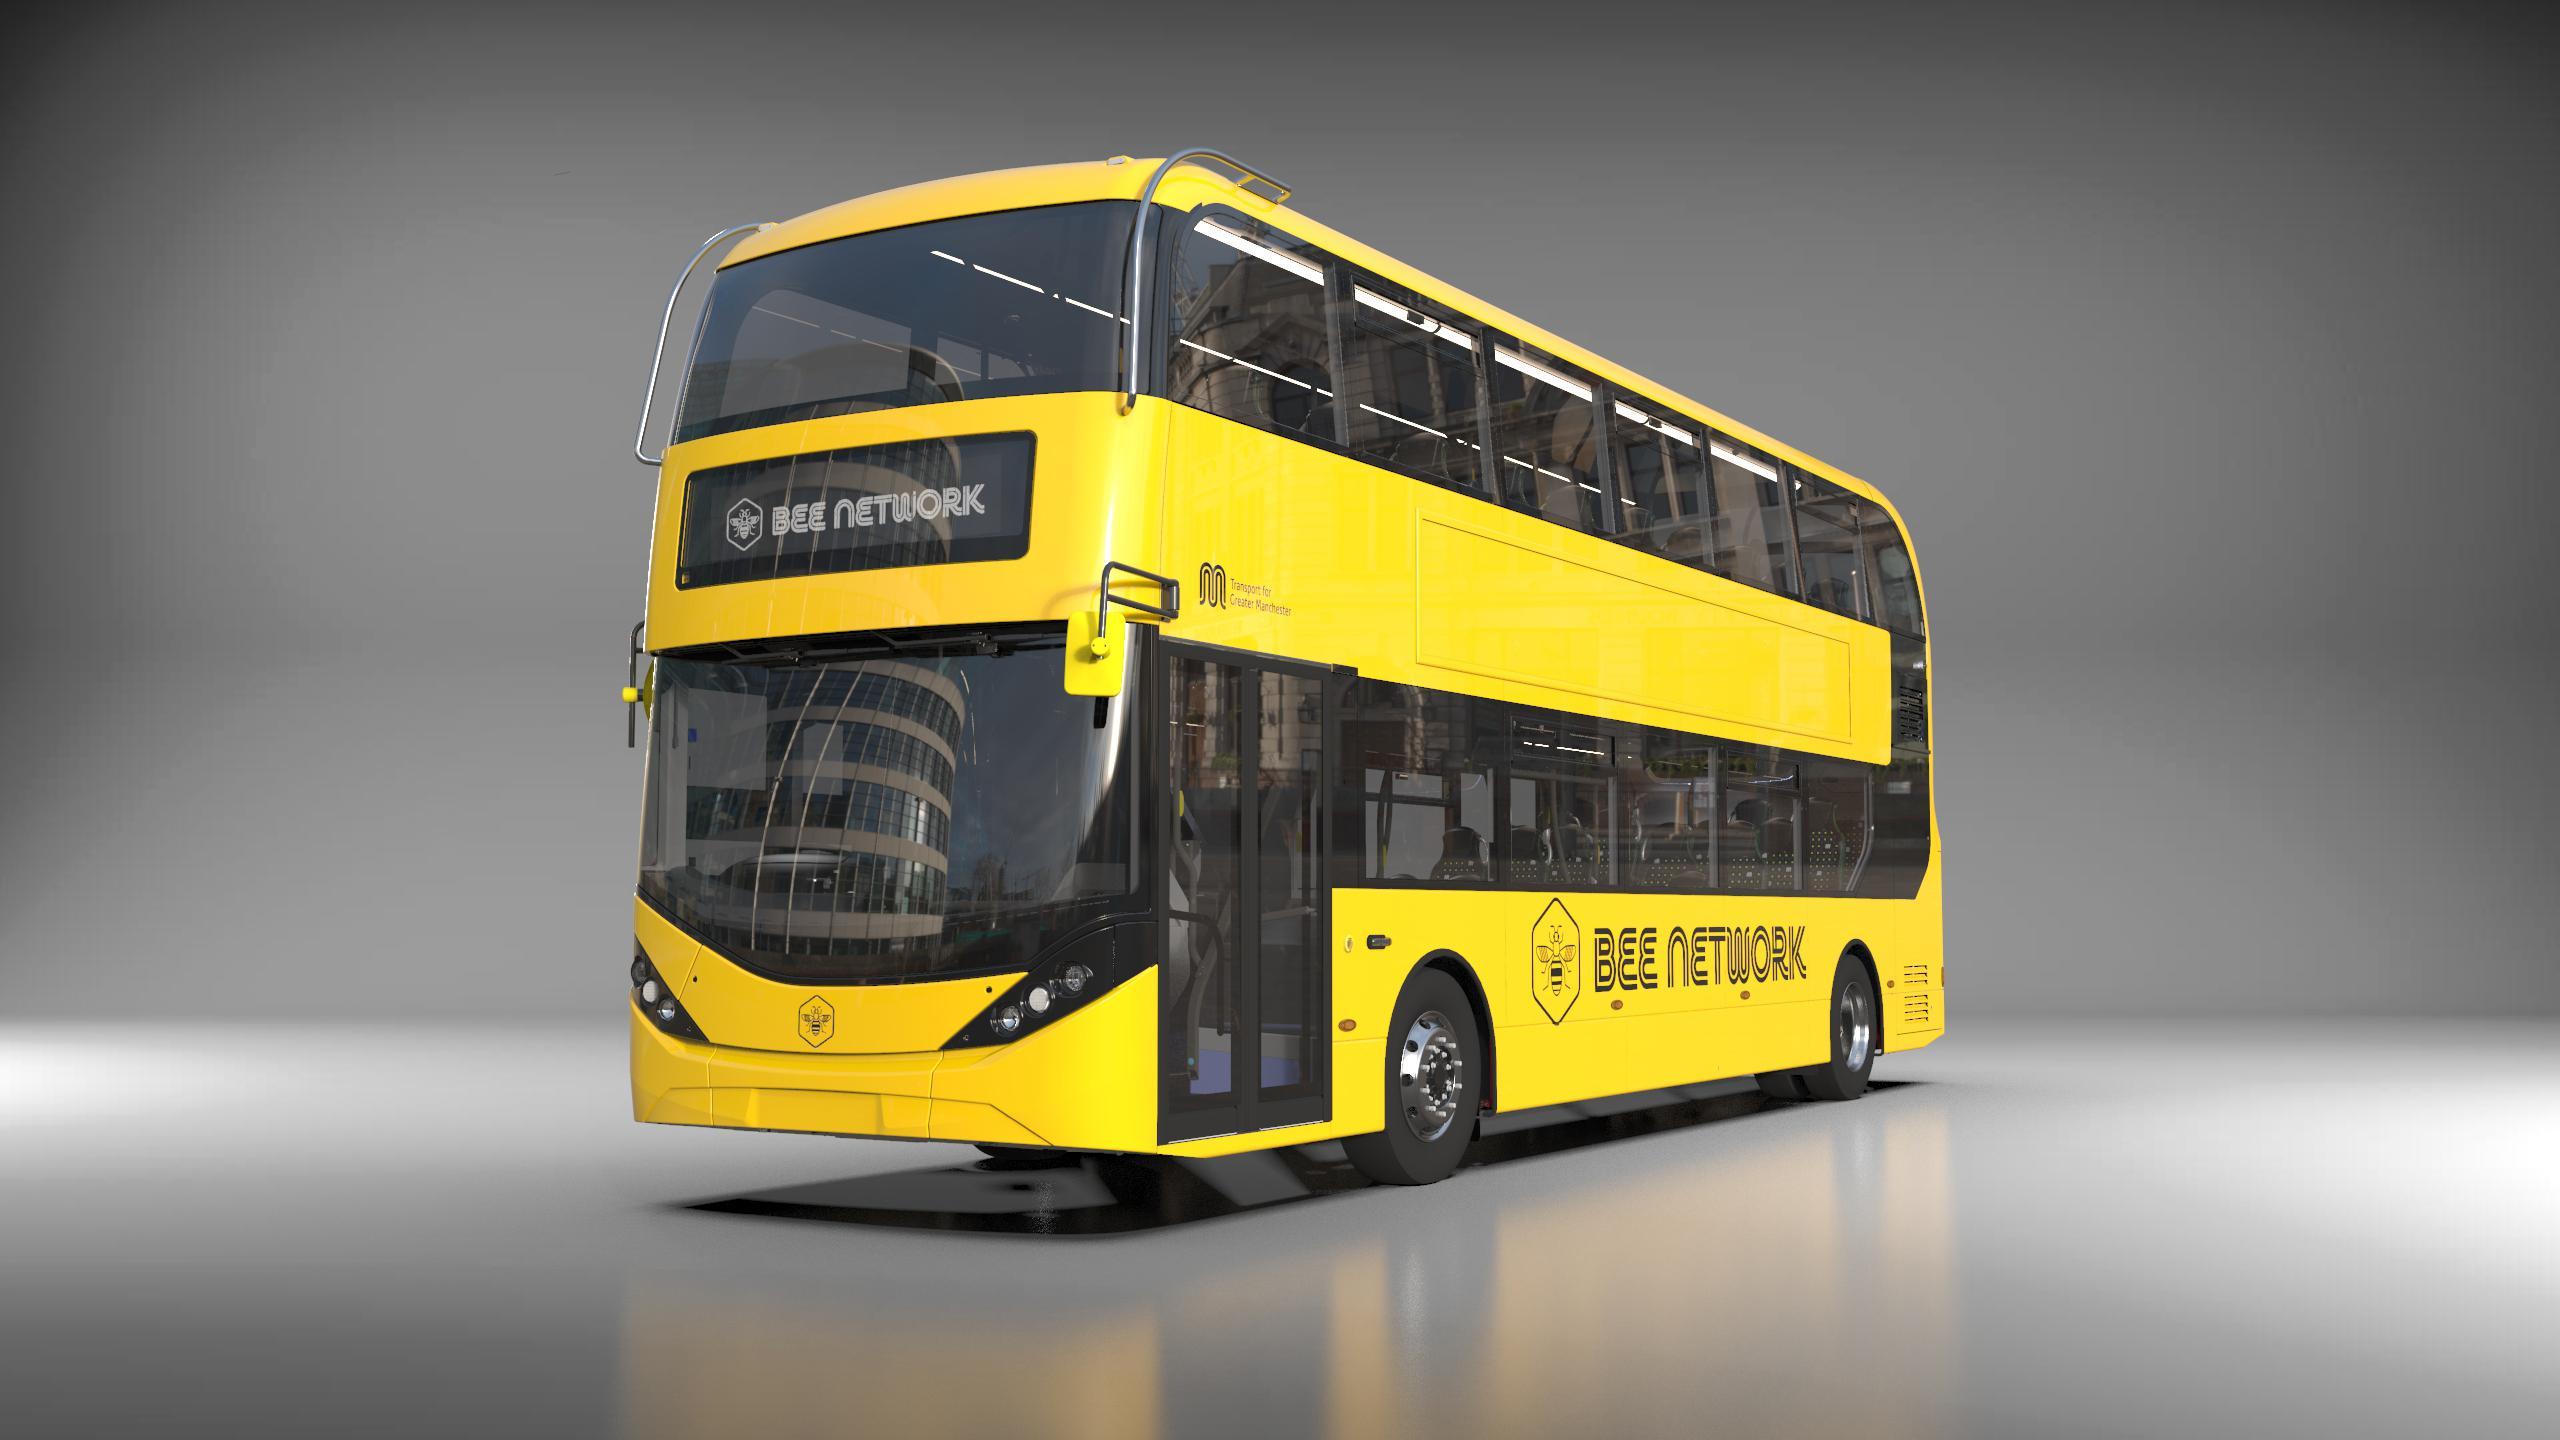 Transport for Greater Manchester orders another 50 electric buses